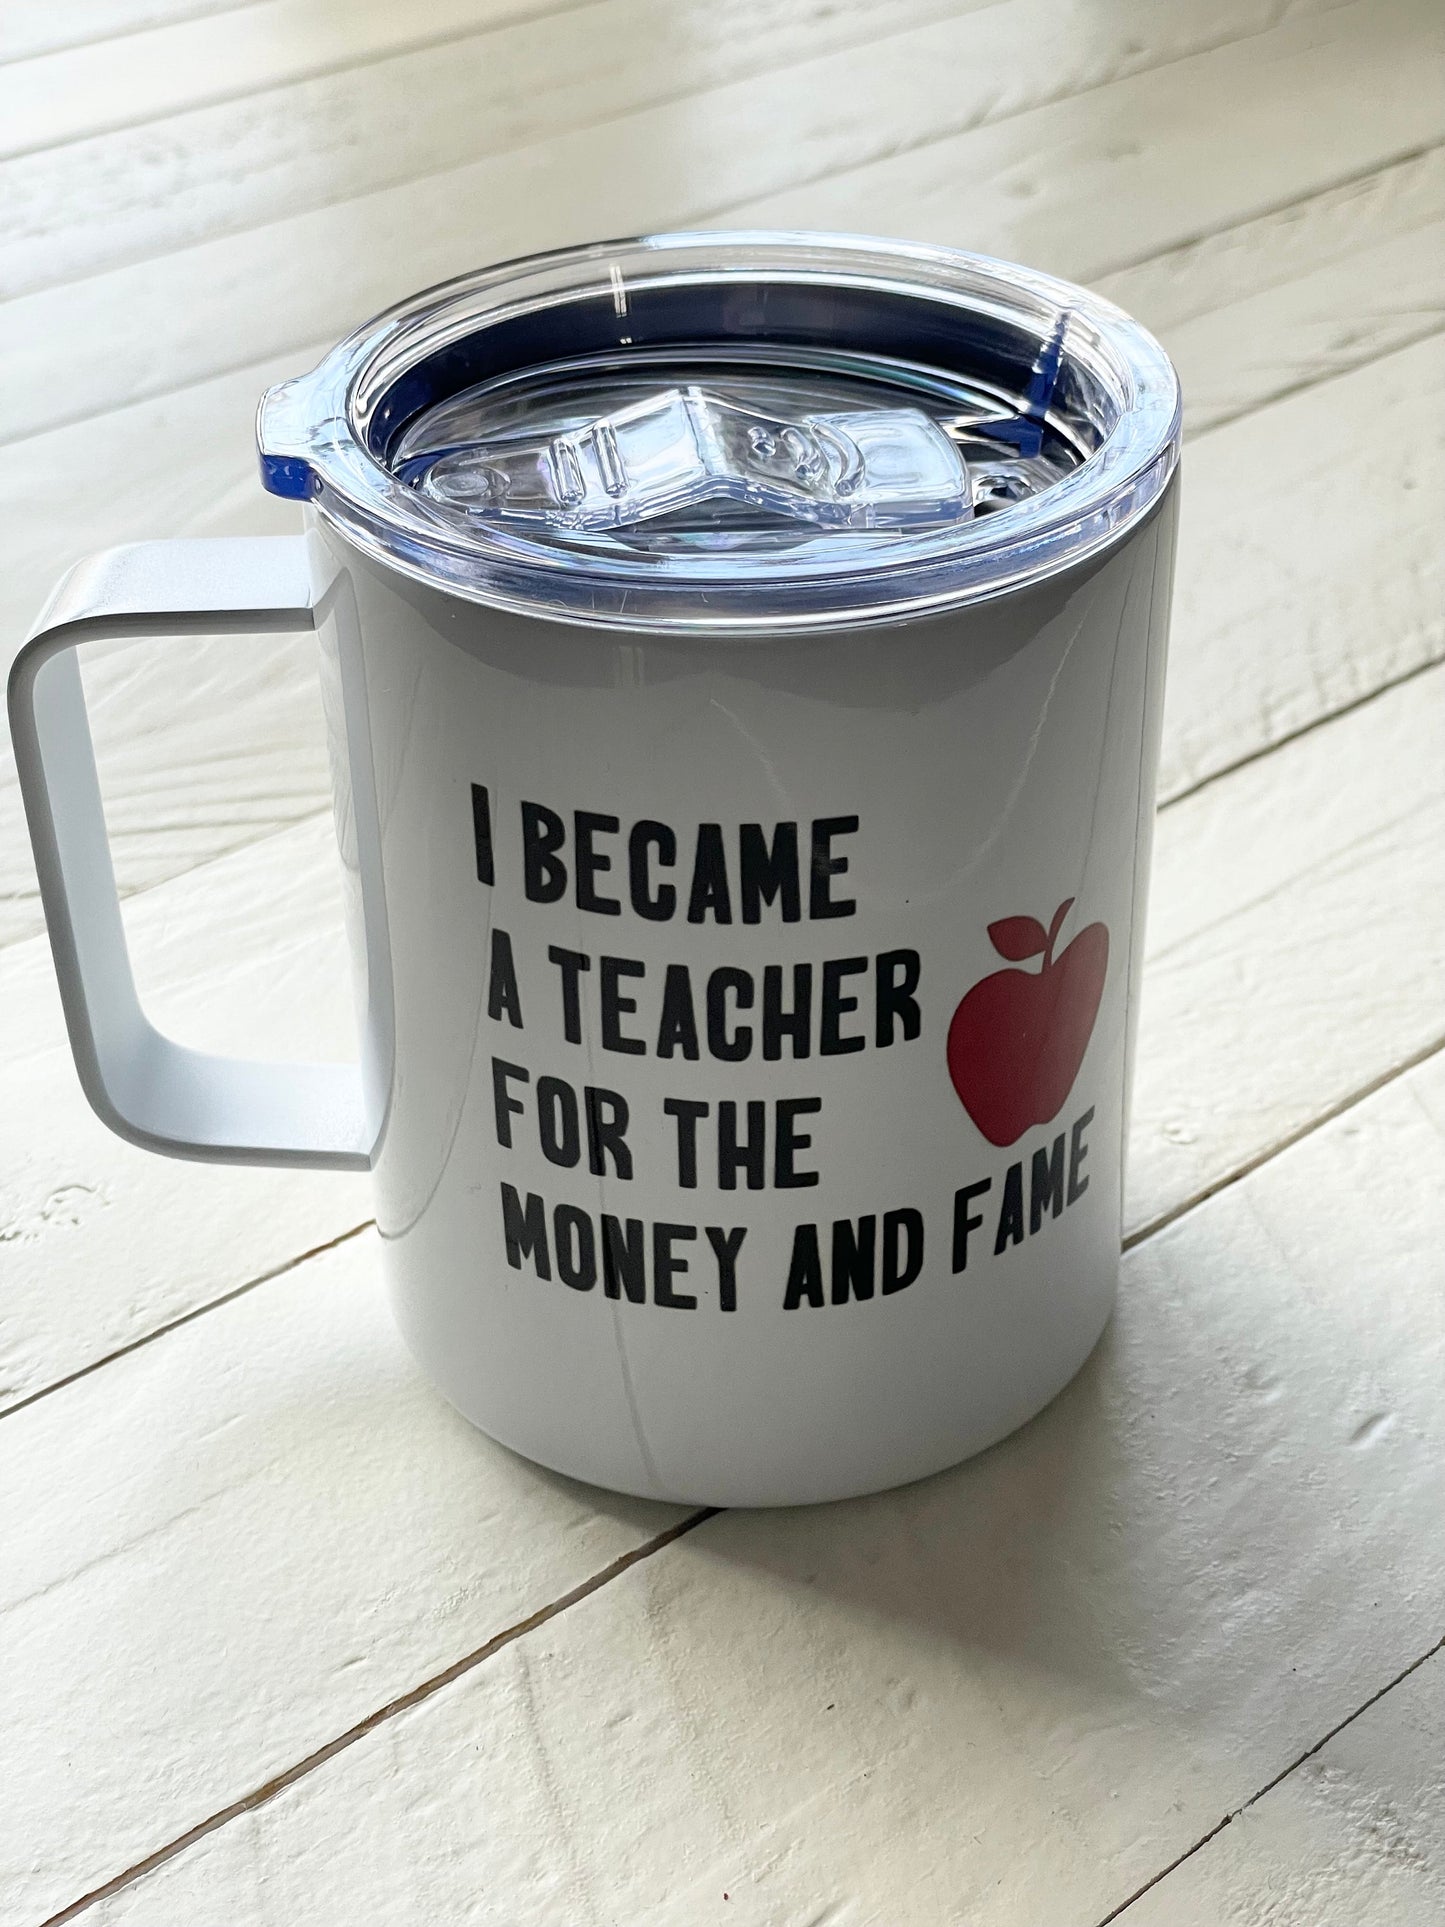 I became a Teach for the Money and Fame, 10oz Stainless Steele Camper Mug